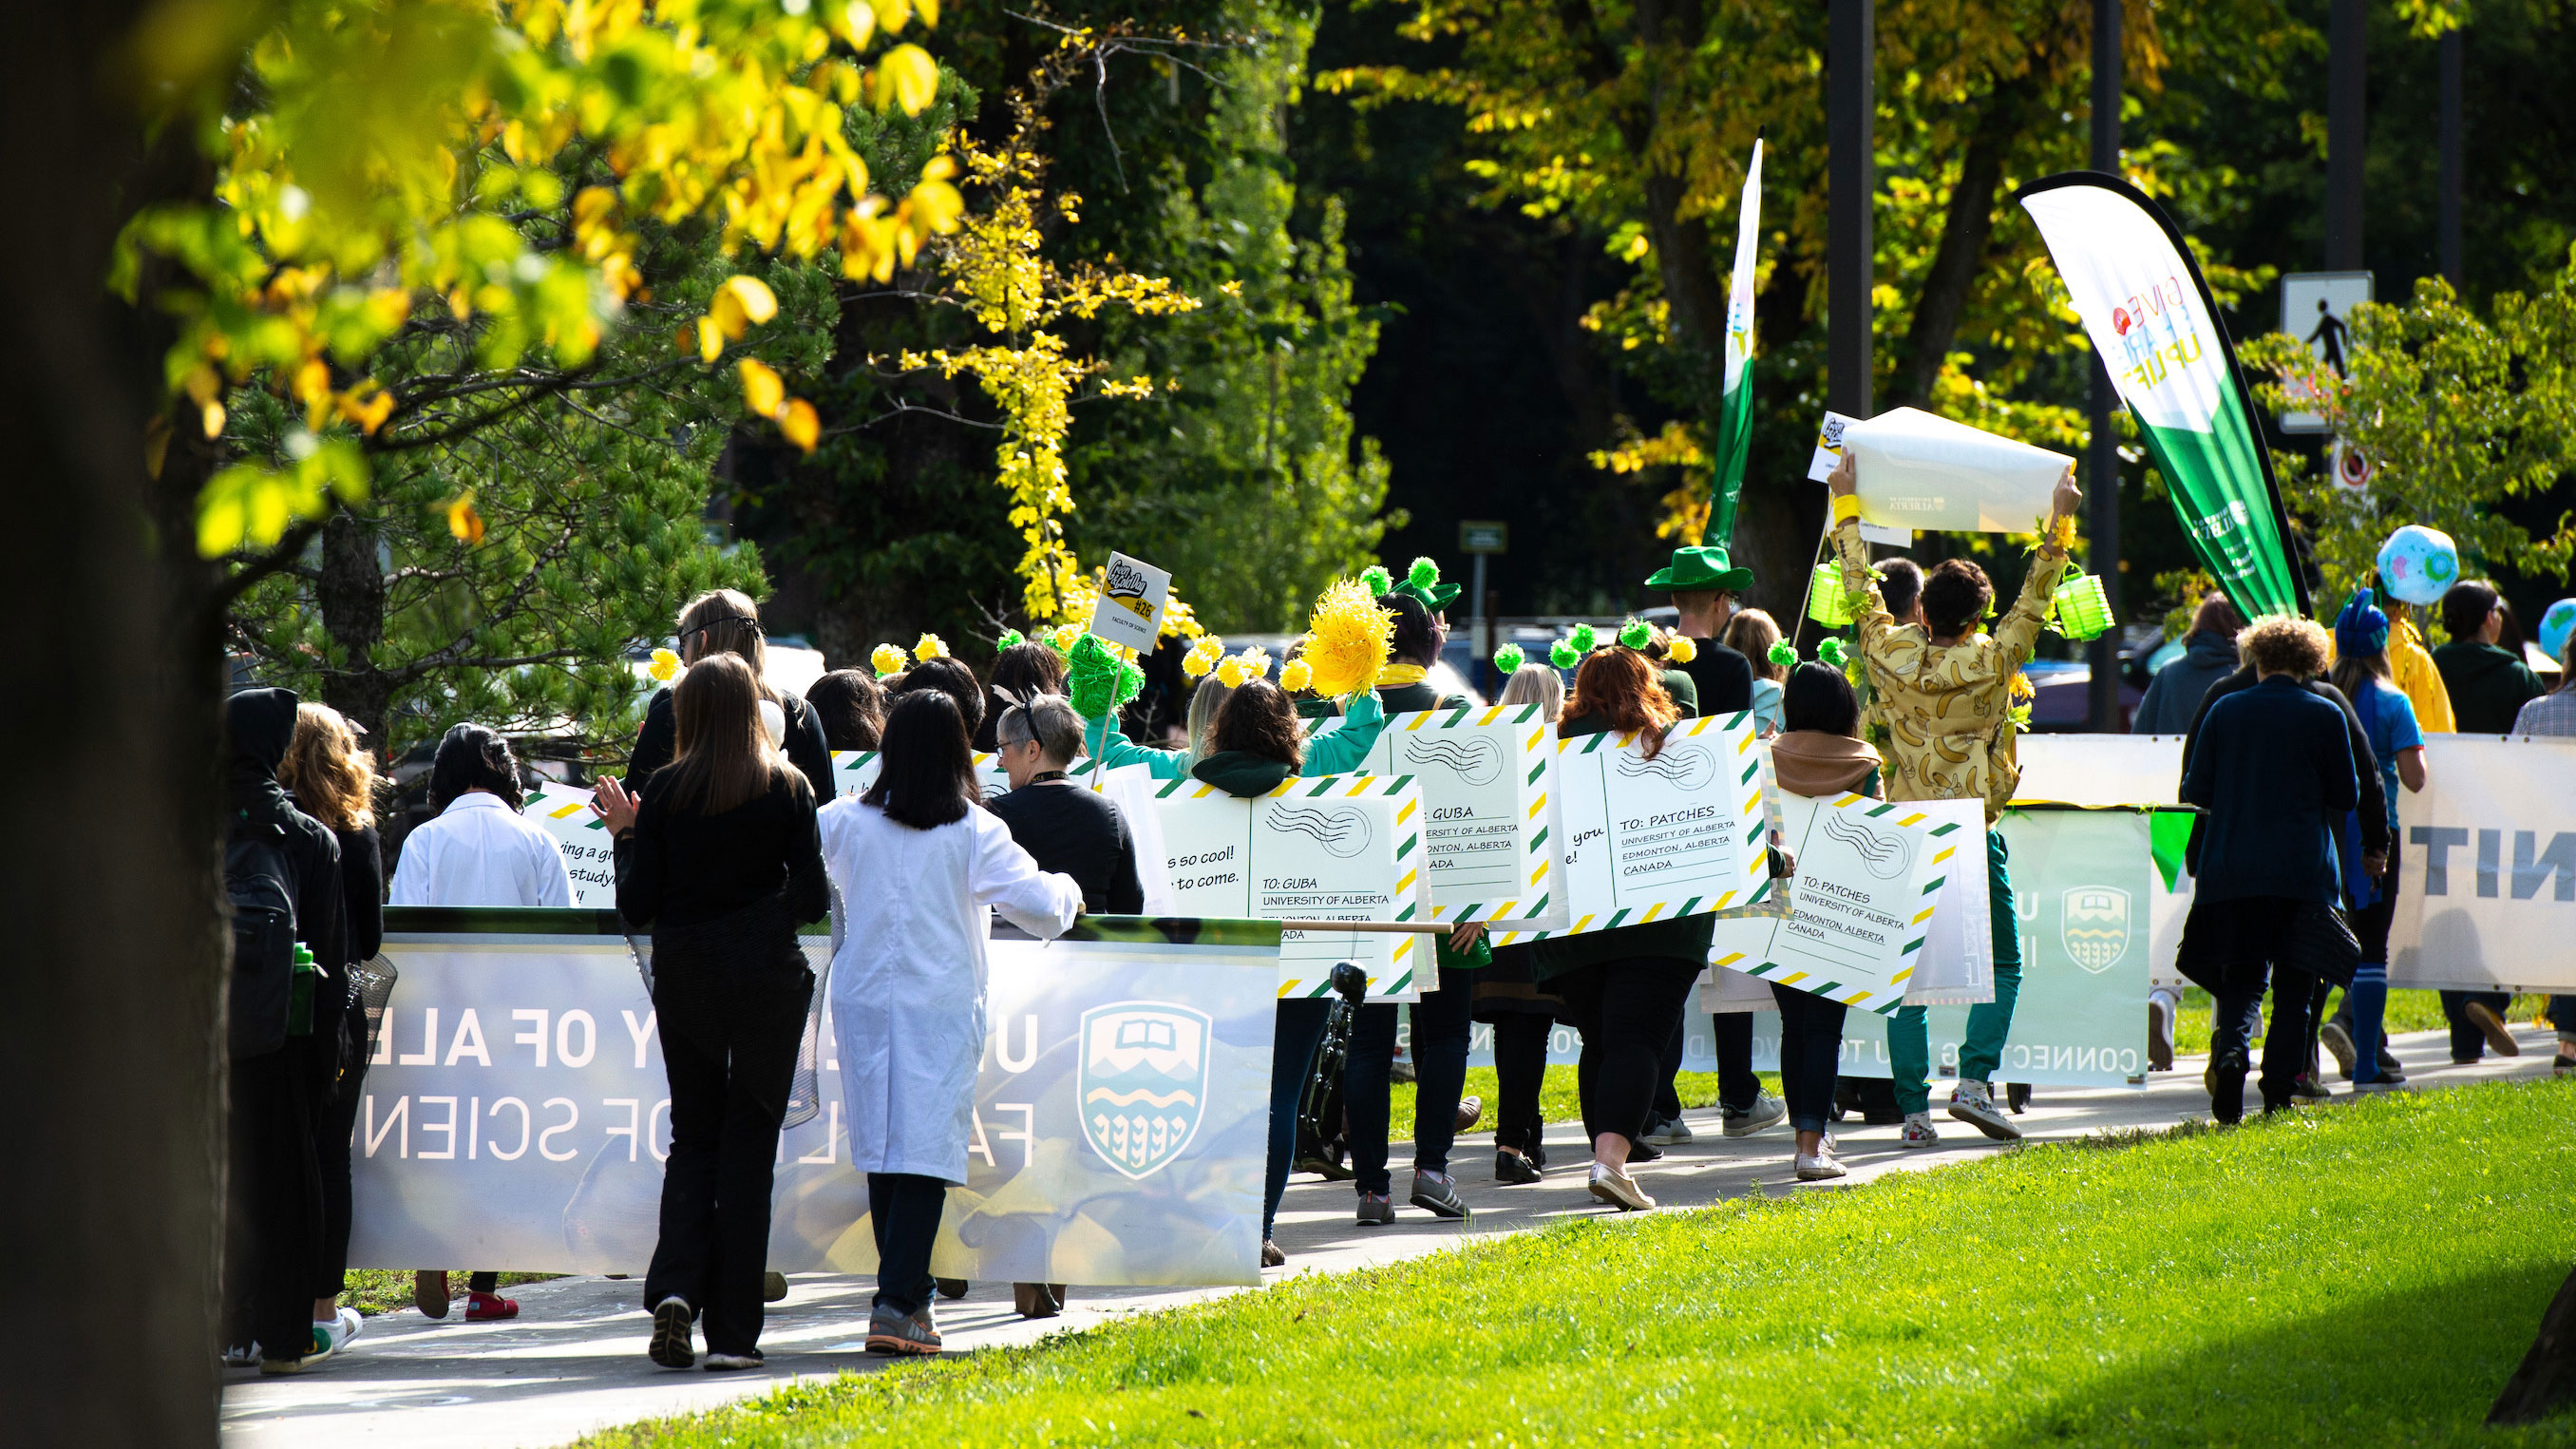 green and gold parade with people celebrating the U of A